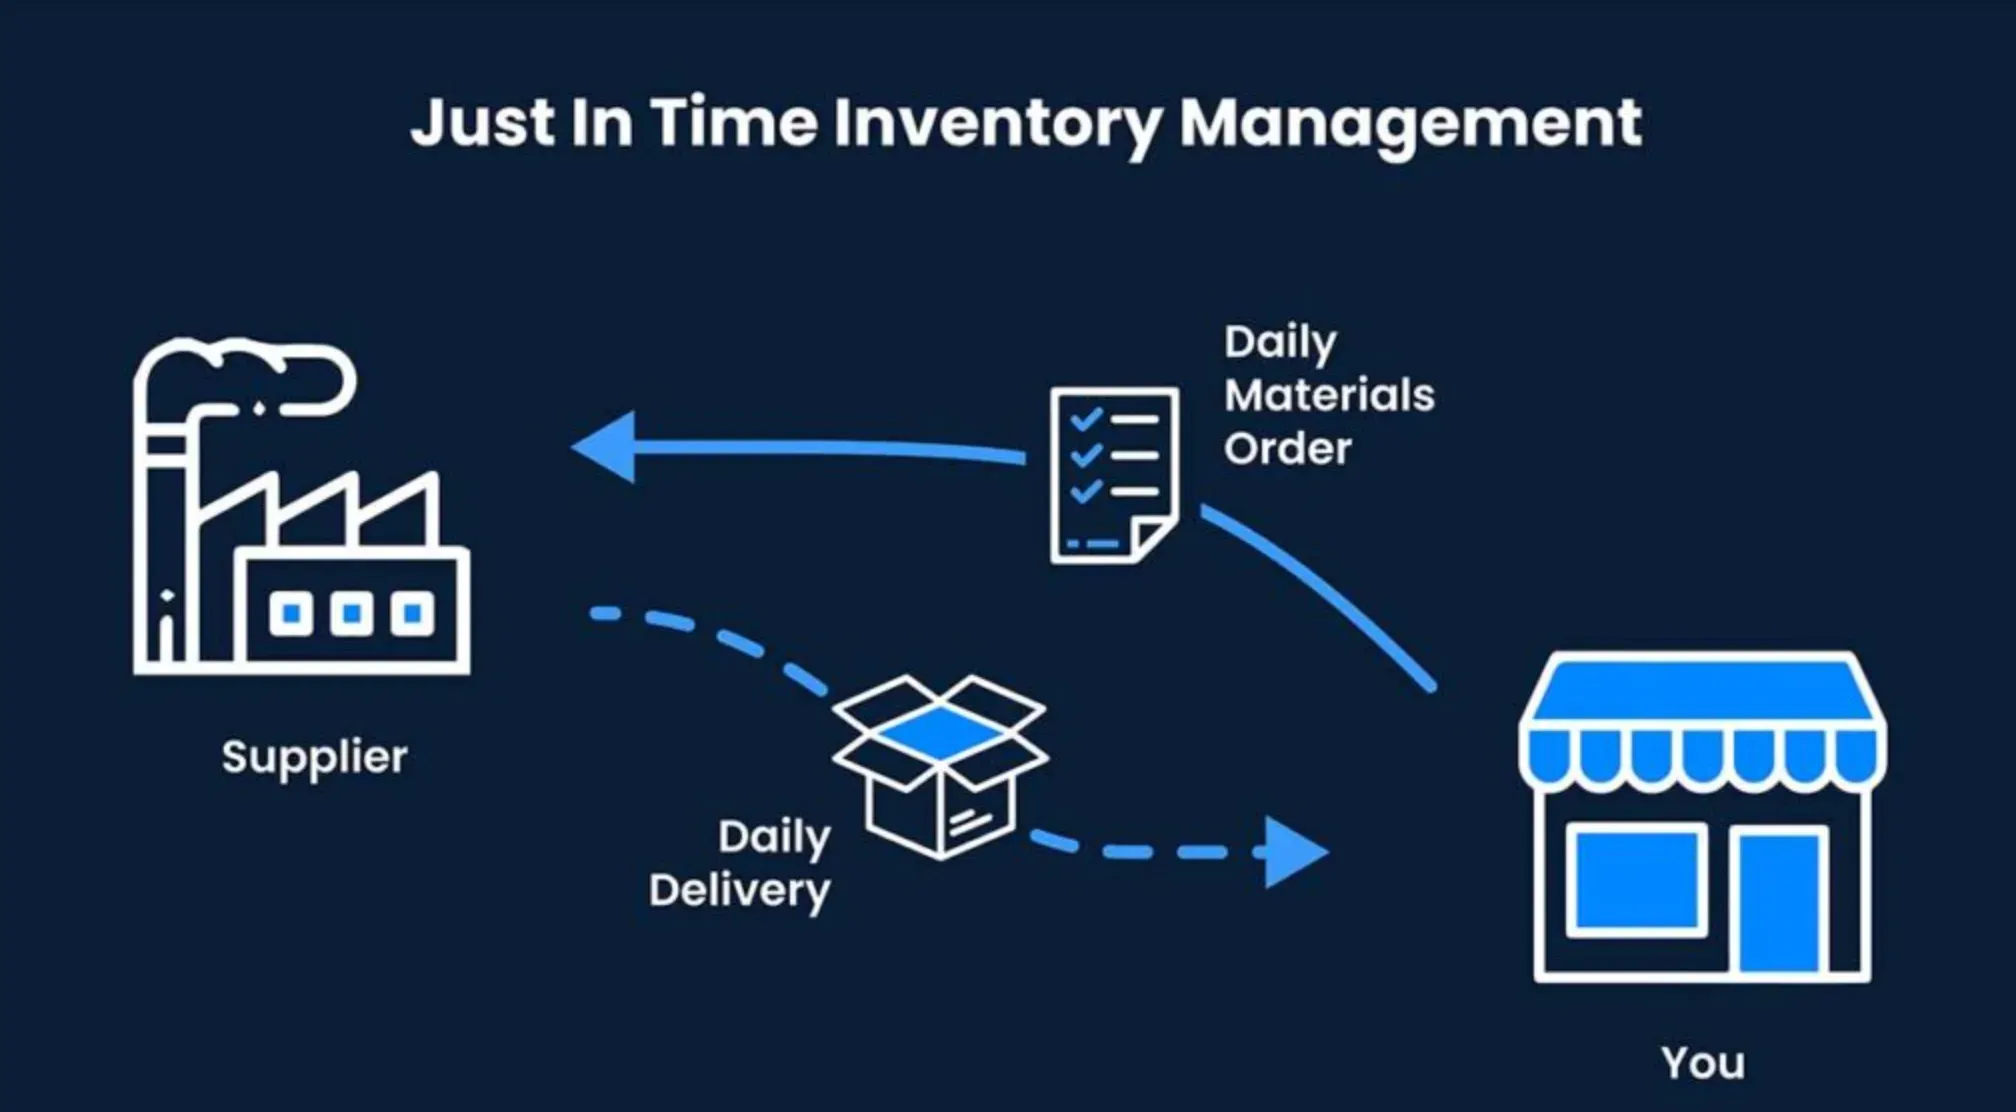 How to Implement Just in Time Inventory?